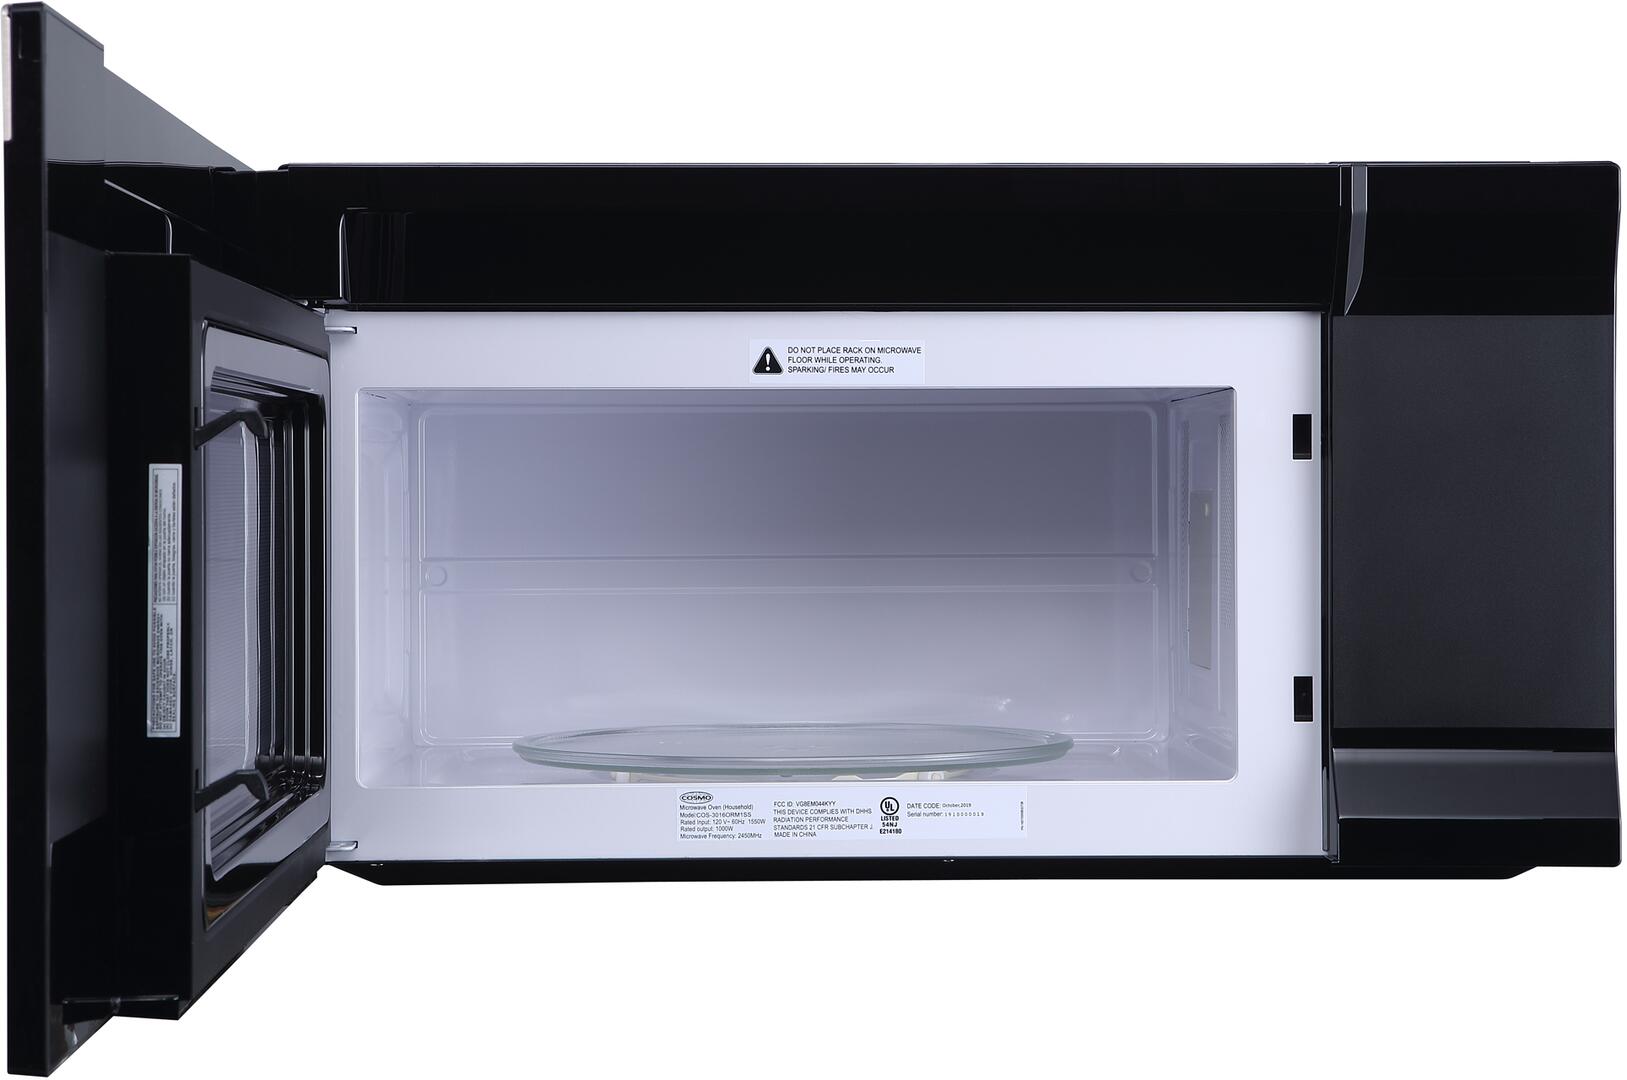 1.6 cu ft 1100W Stainless Steel Microwave Oven by Magic Chef at